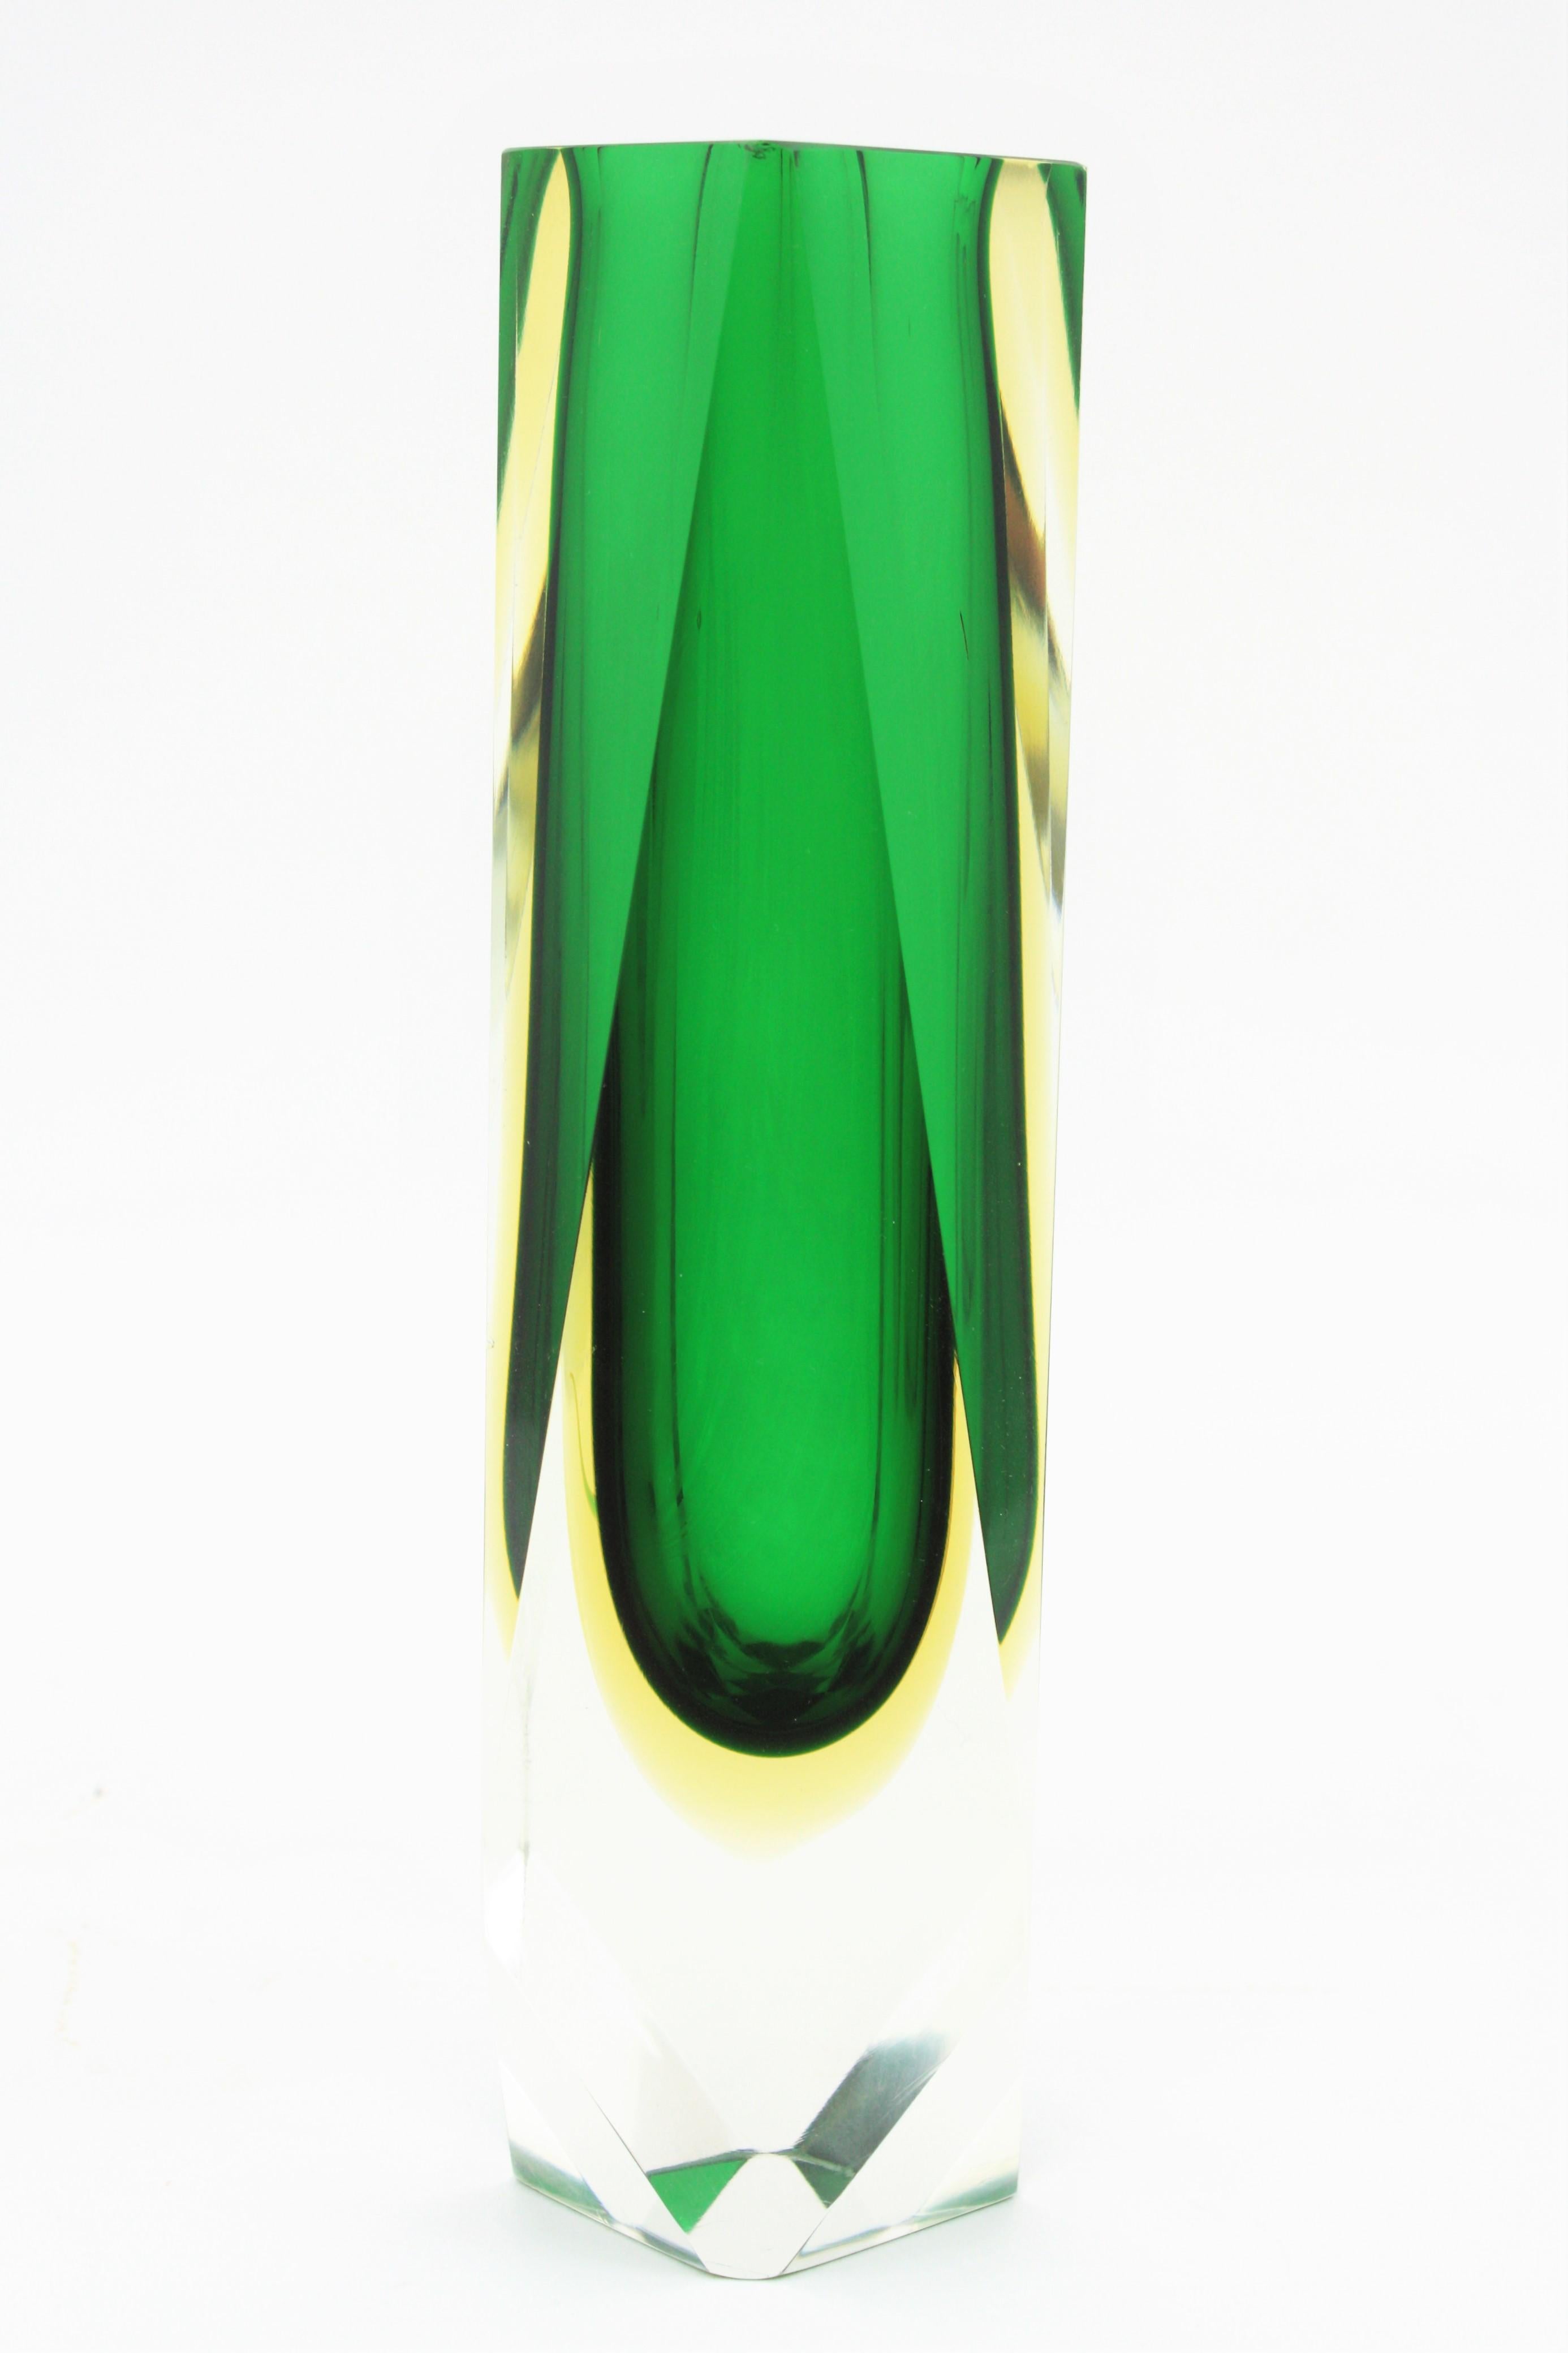 Blown Glass Extra Large Mandruzzato Murano Sommerso Green Black Yellow Faceted Glass Vase